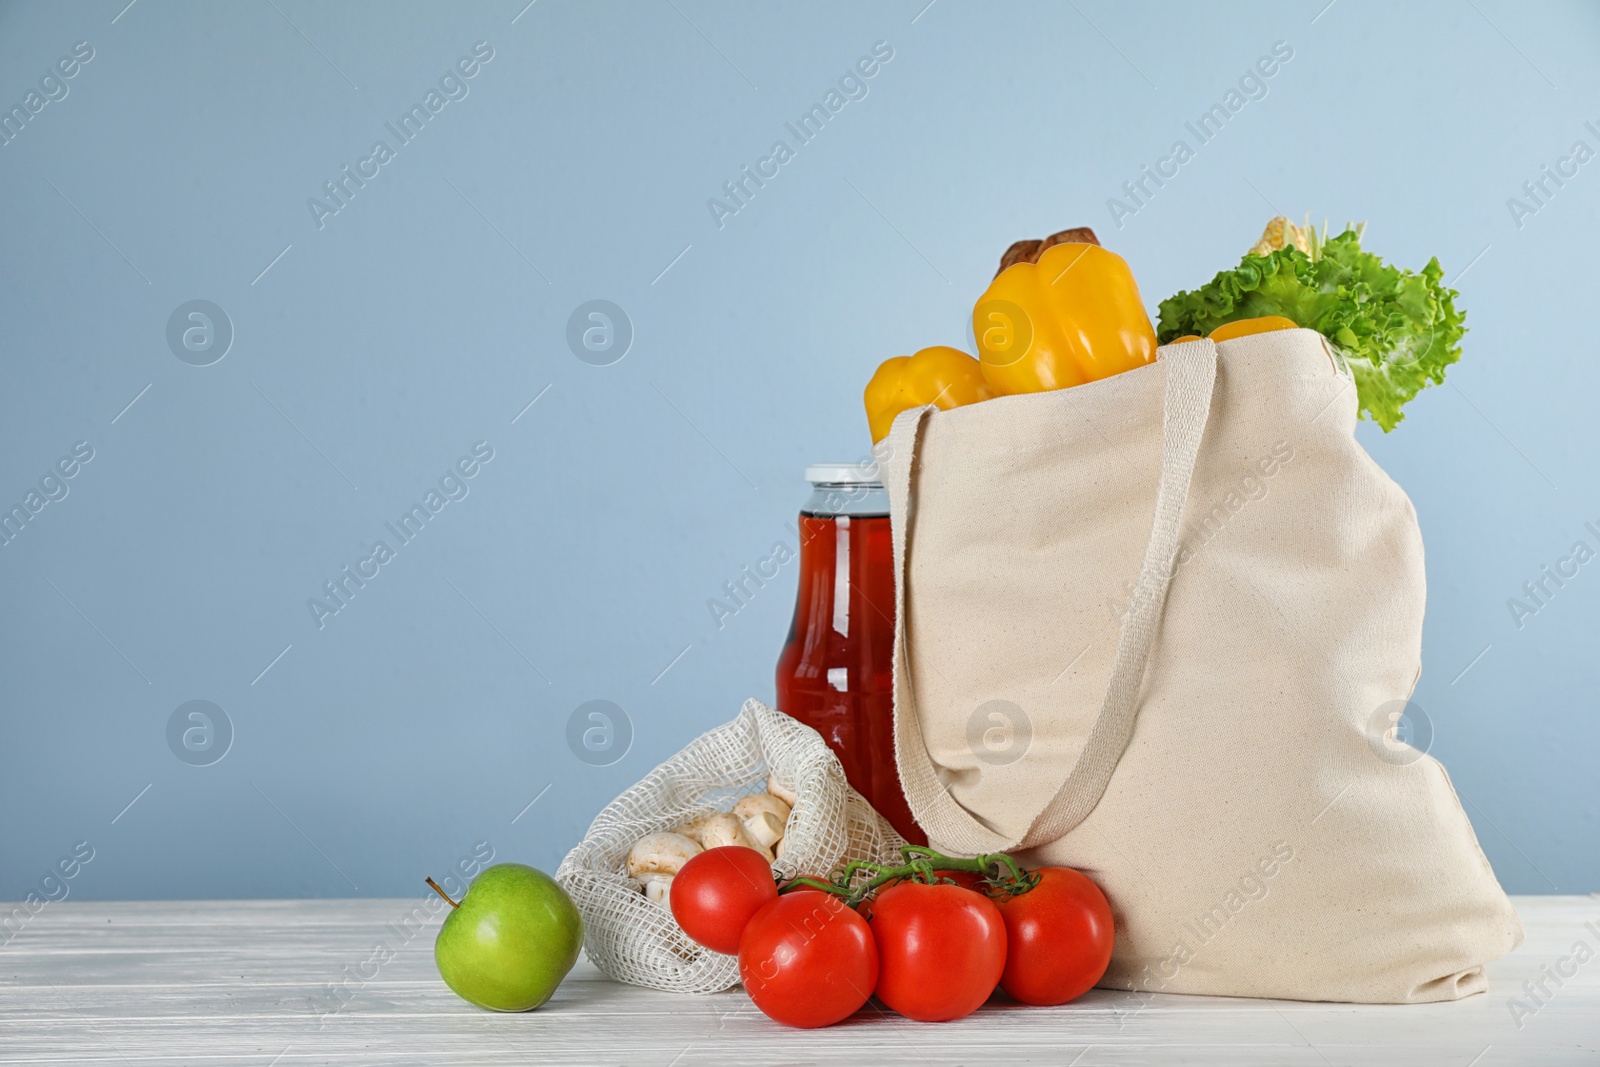 Photo of Shopping bag with fresh vegetables and other products on white wooden table against light blue background, space for text